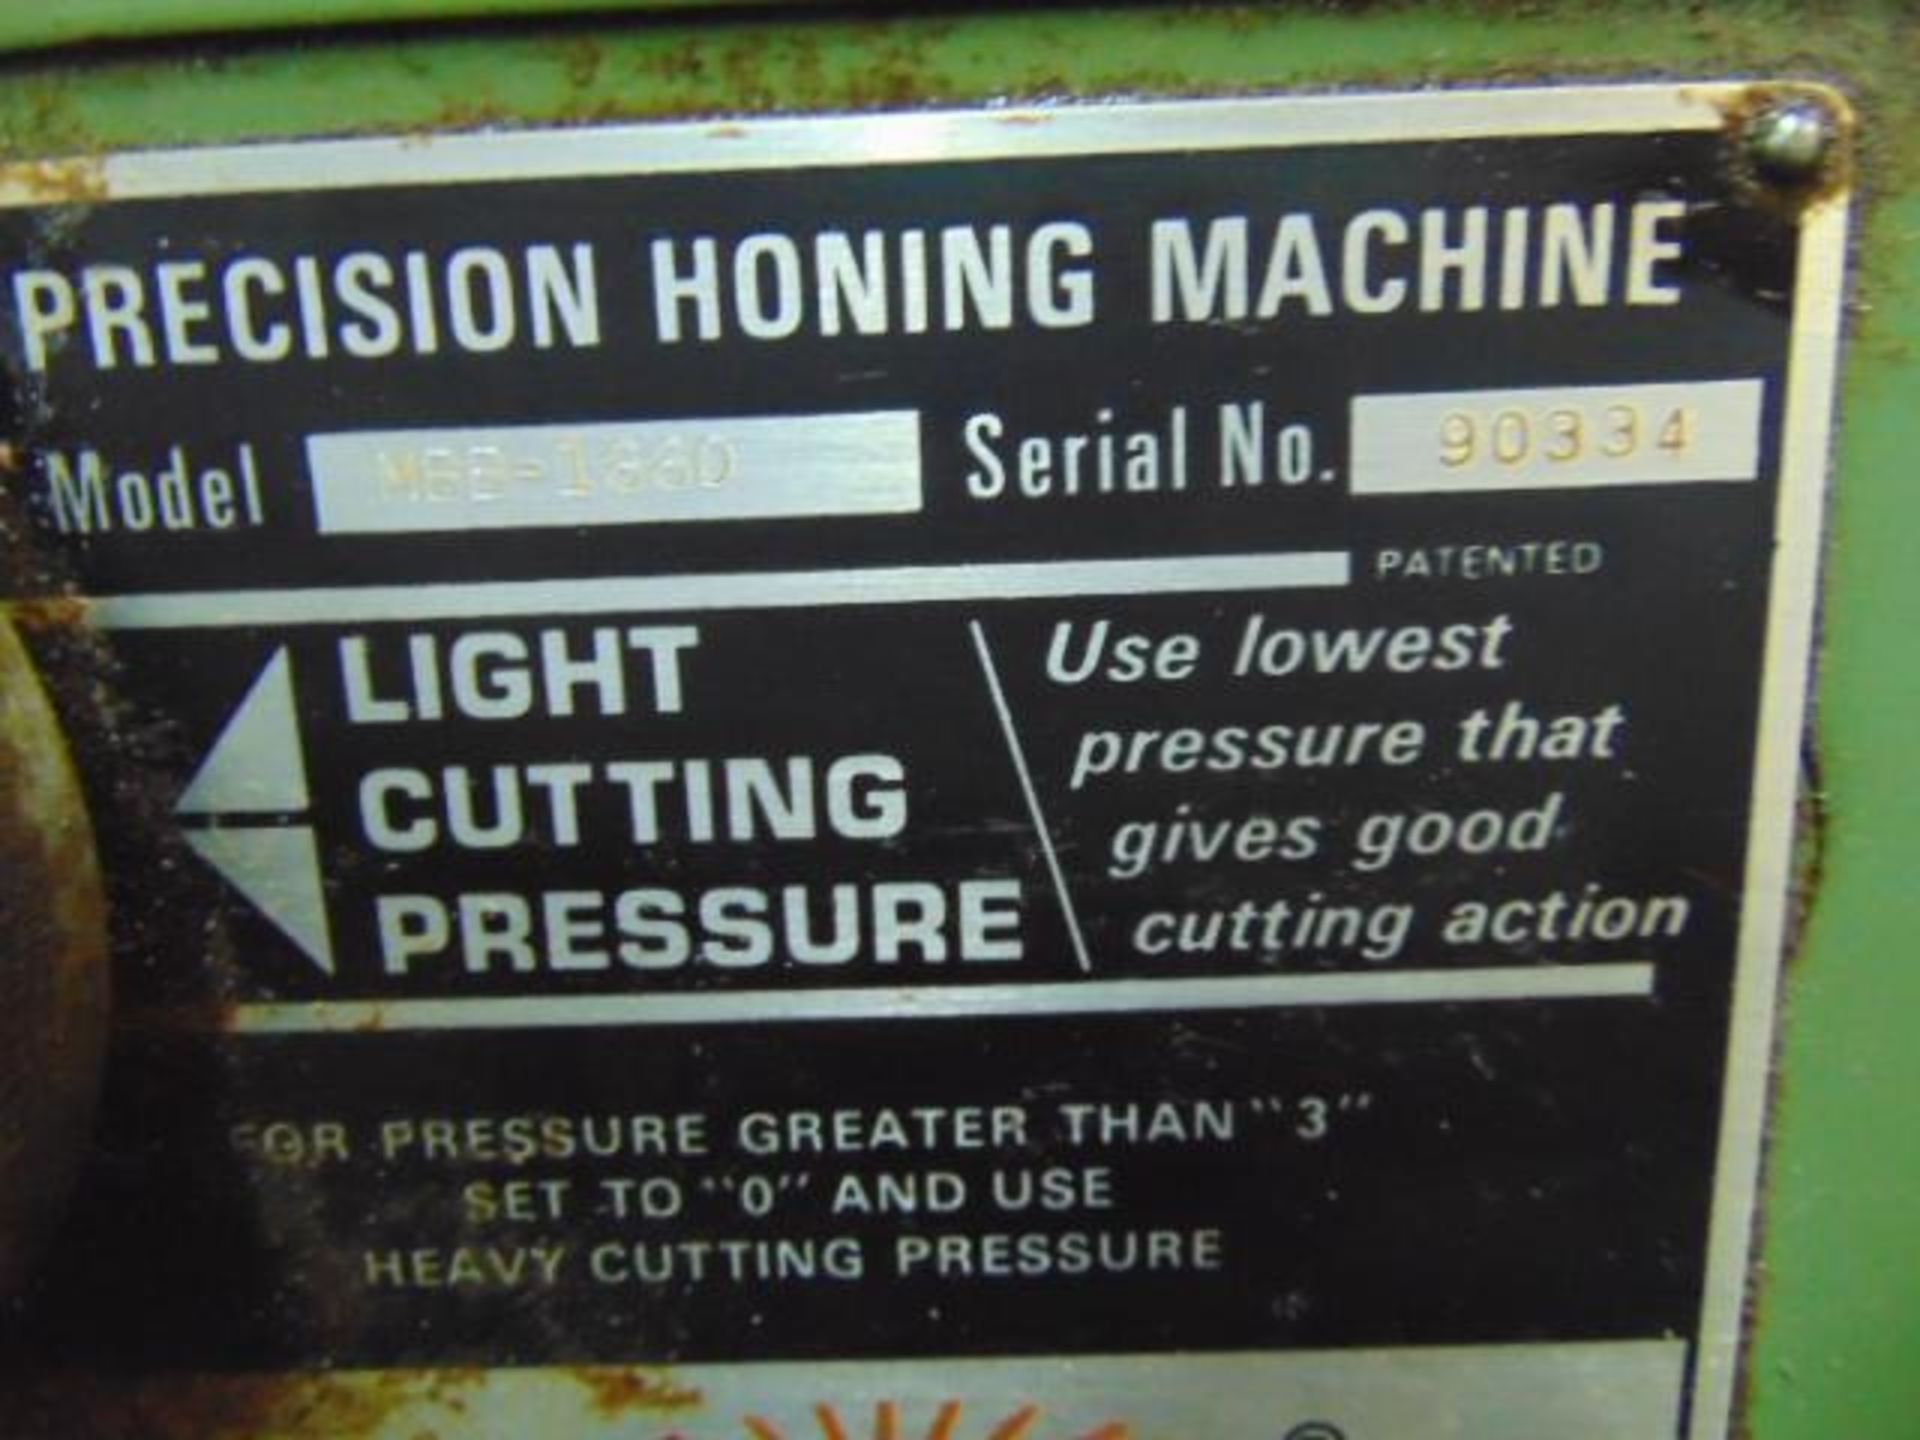 PRECISION HONE, SUNNEN MDL. MBB-1660, w/ related tooling and accessories, S/N 90334 - Image 4 of 6